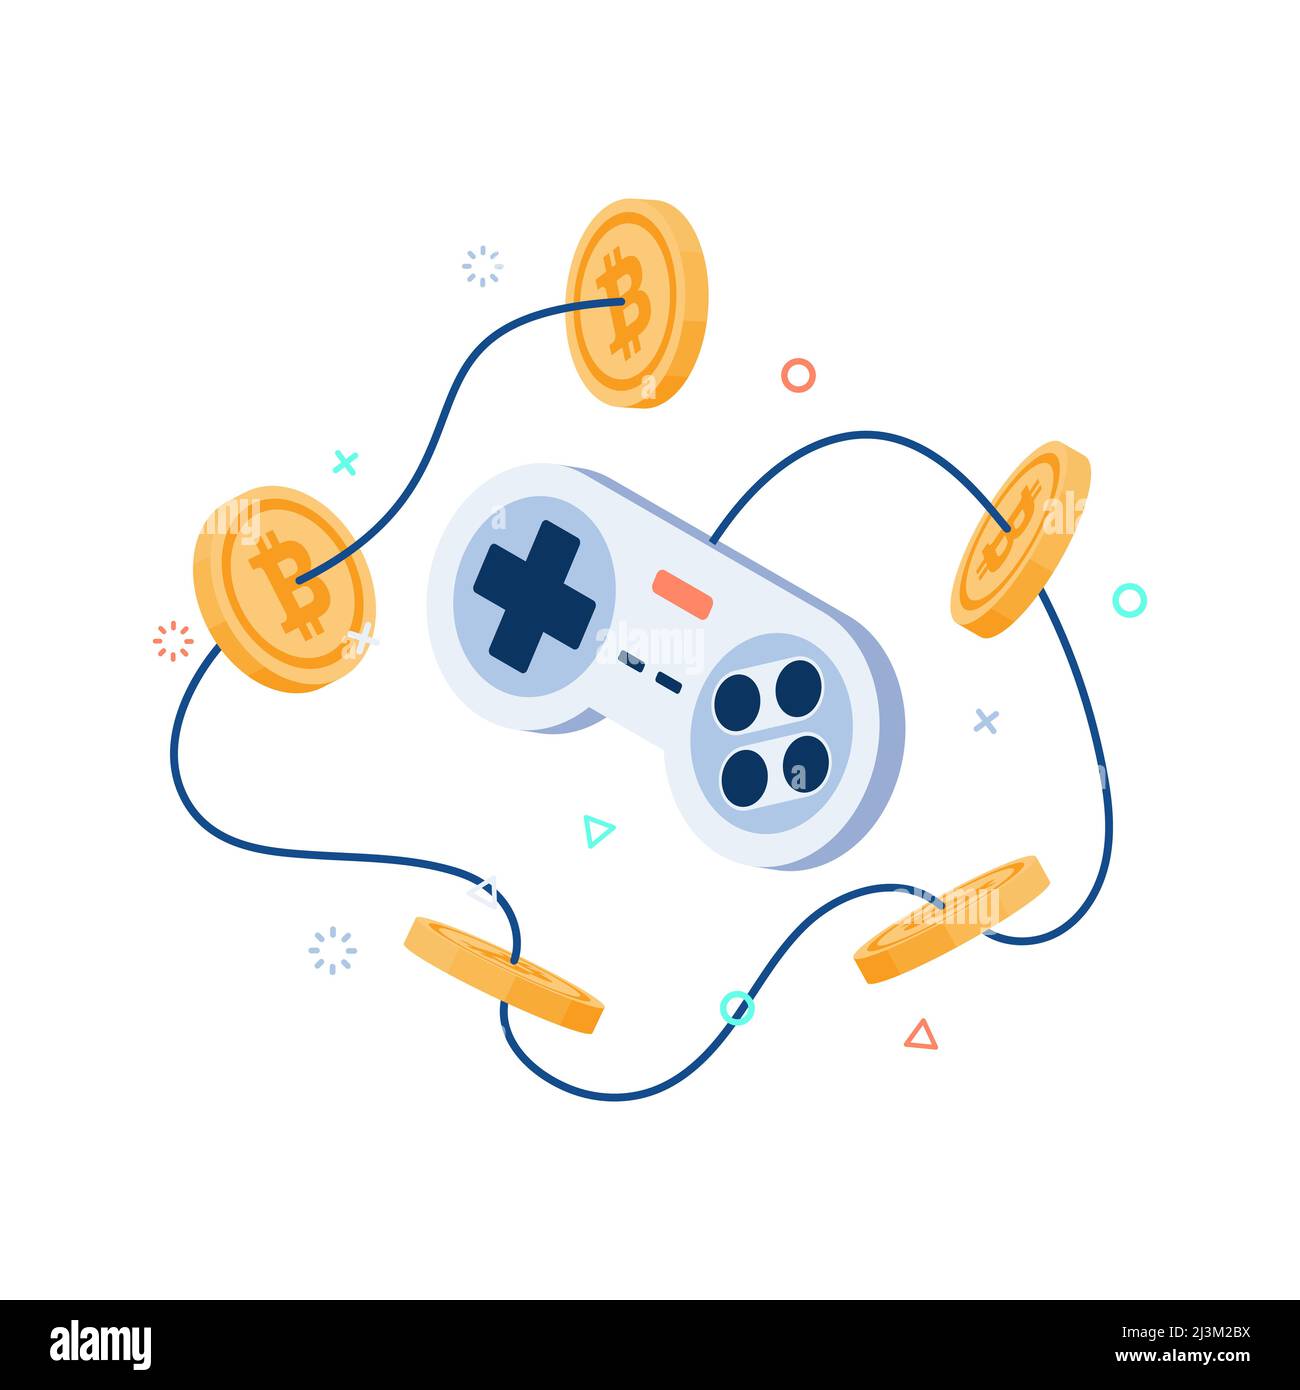 Flat 3d Isometric Classic Game Controller with Bitcoin. Play to Earn and Blockchain Technology Concept. Stock Vector